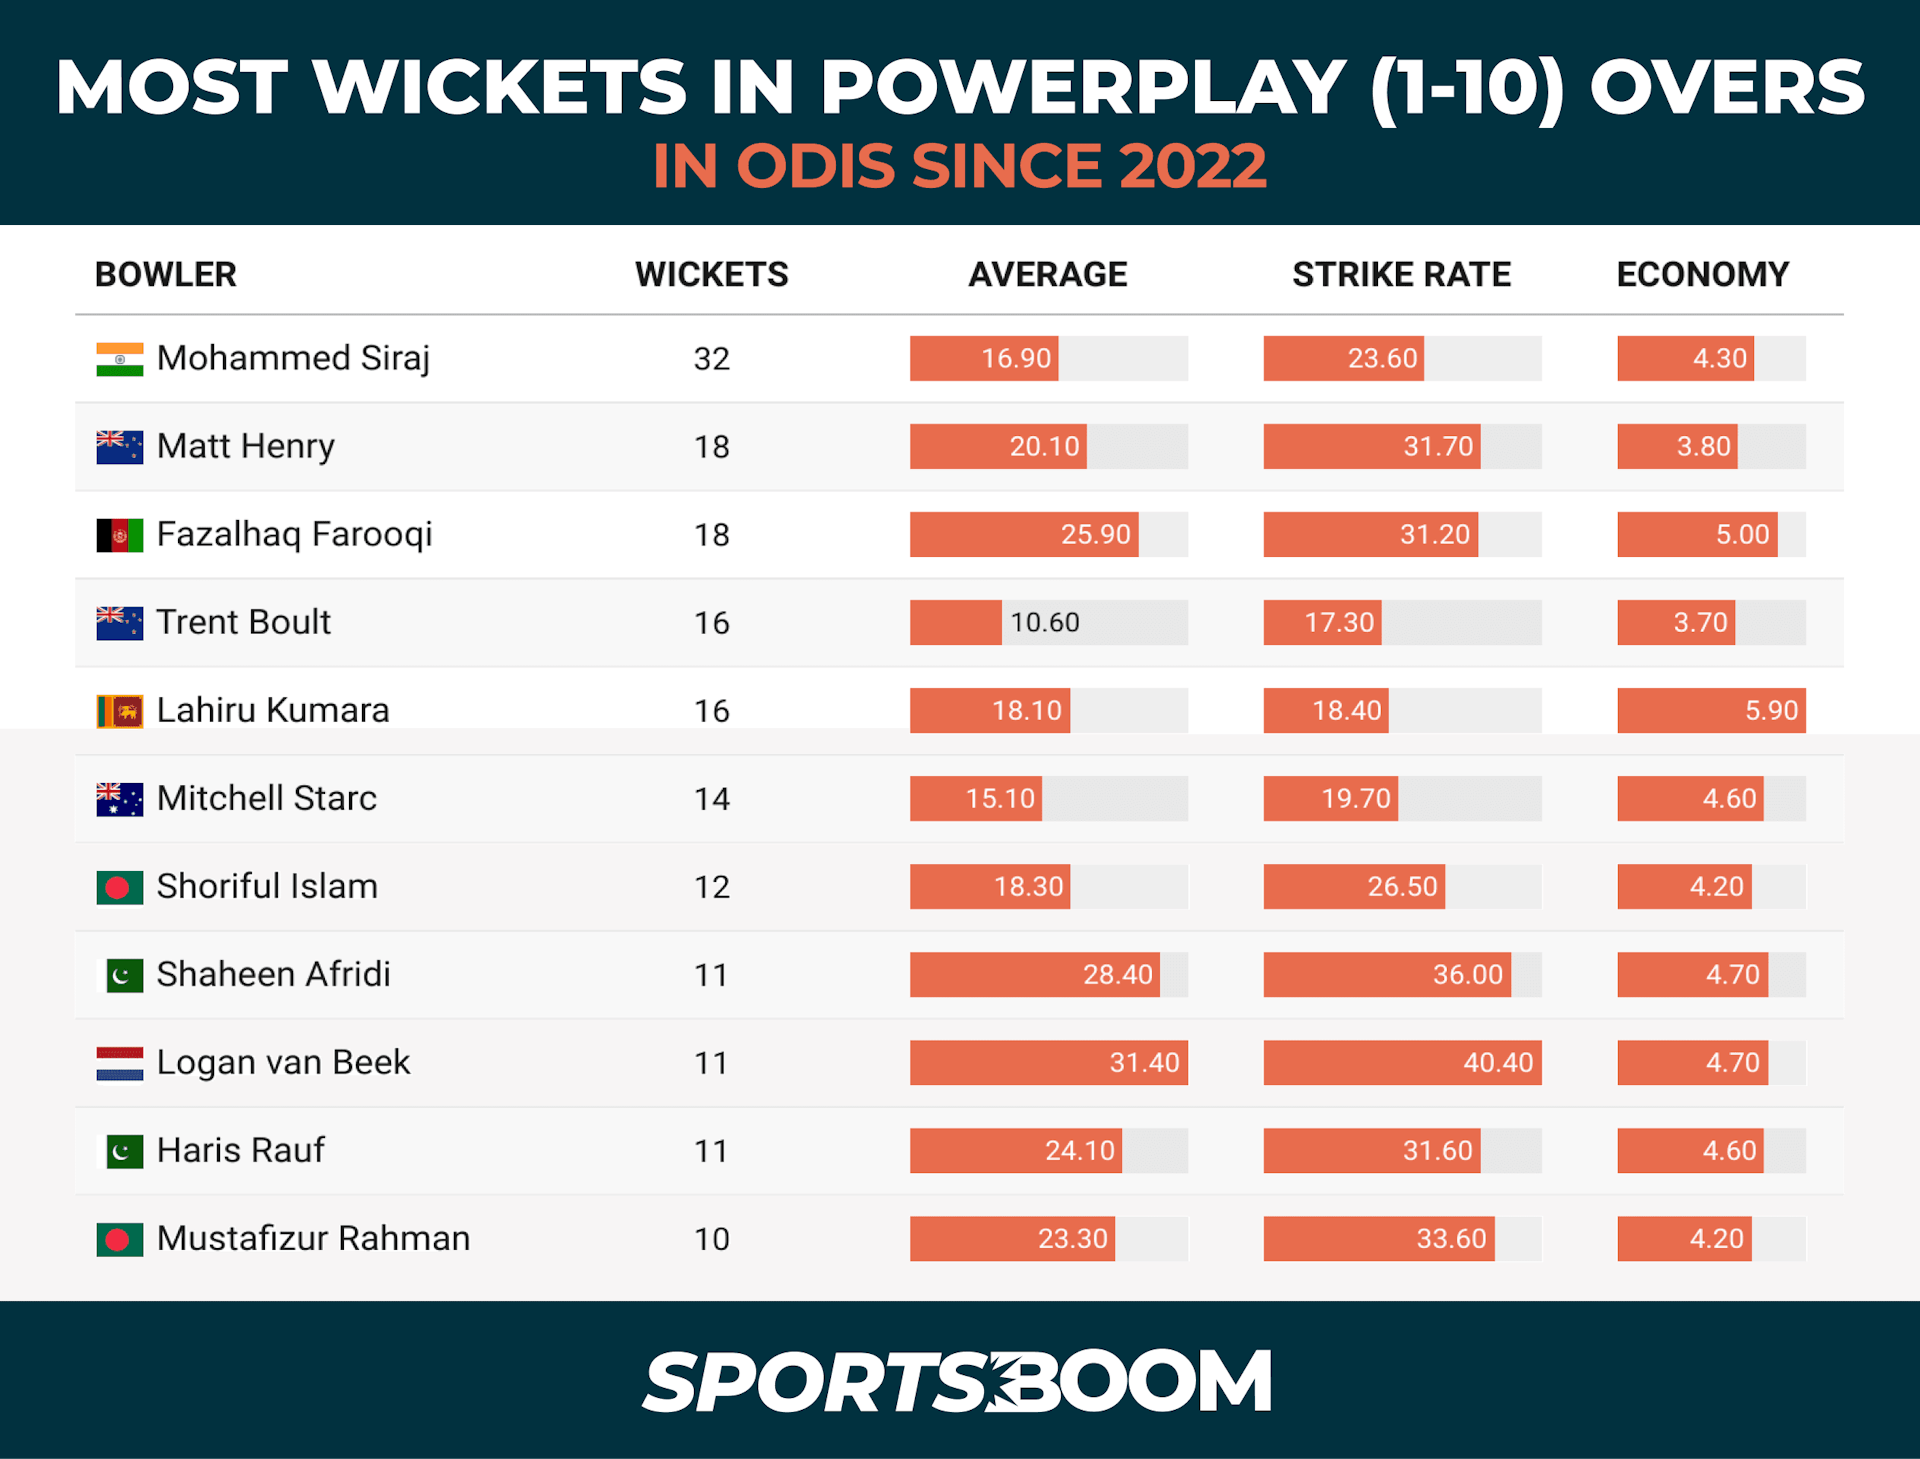 MOST WICKETS IN POWERPLAY (1-10) OVERS IN ODIS SINCE 2022.png